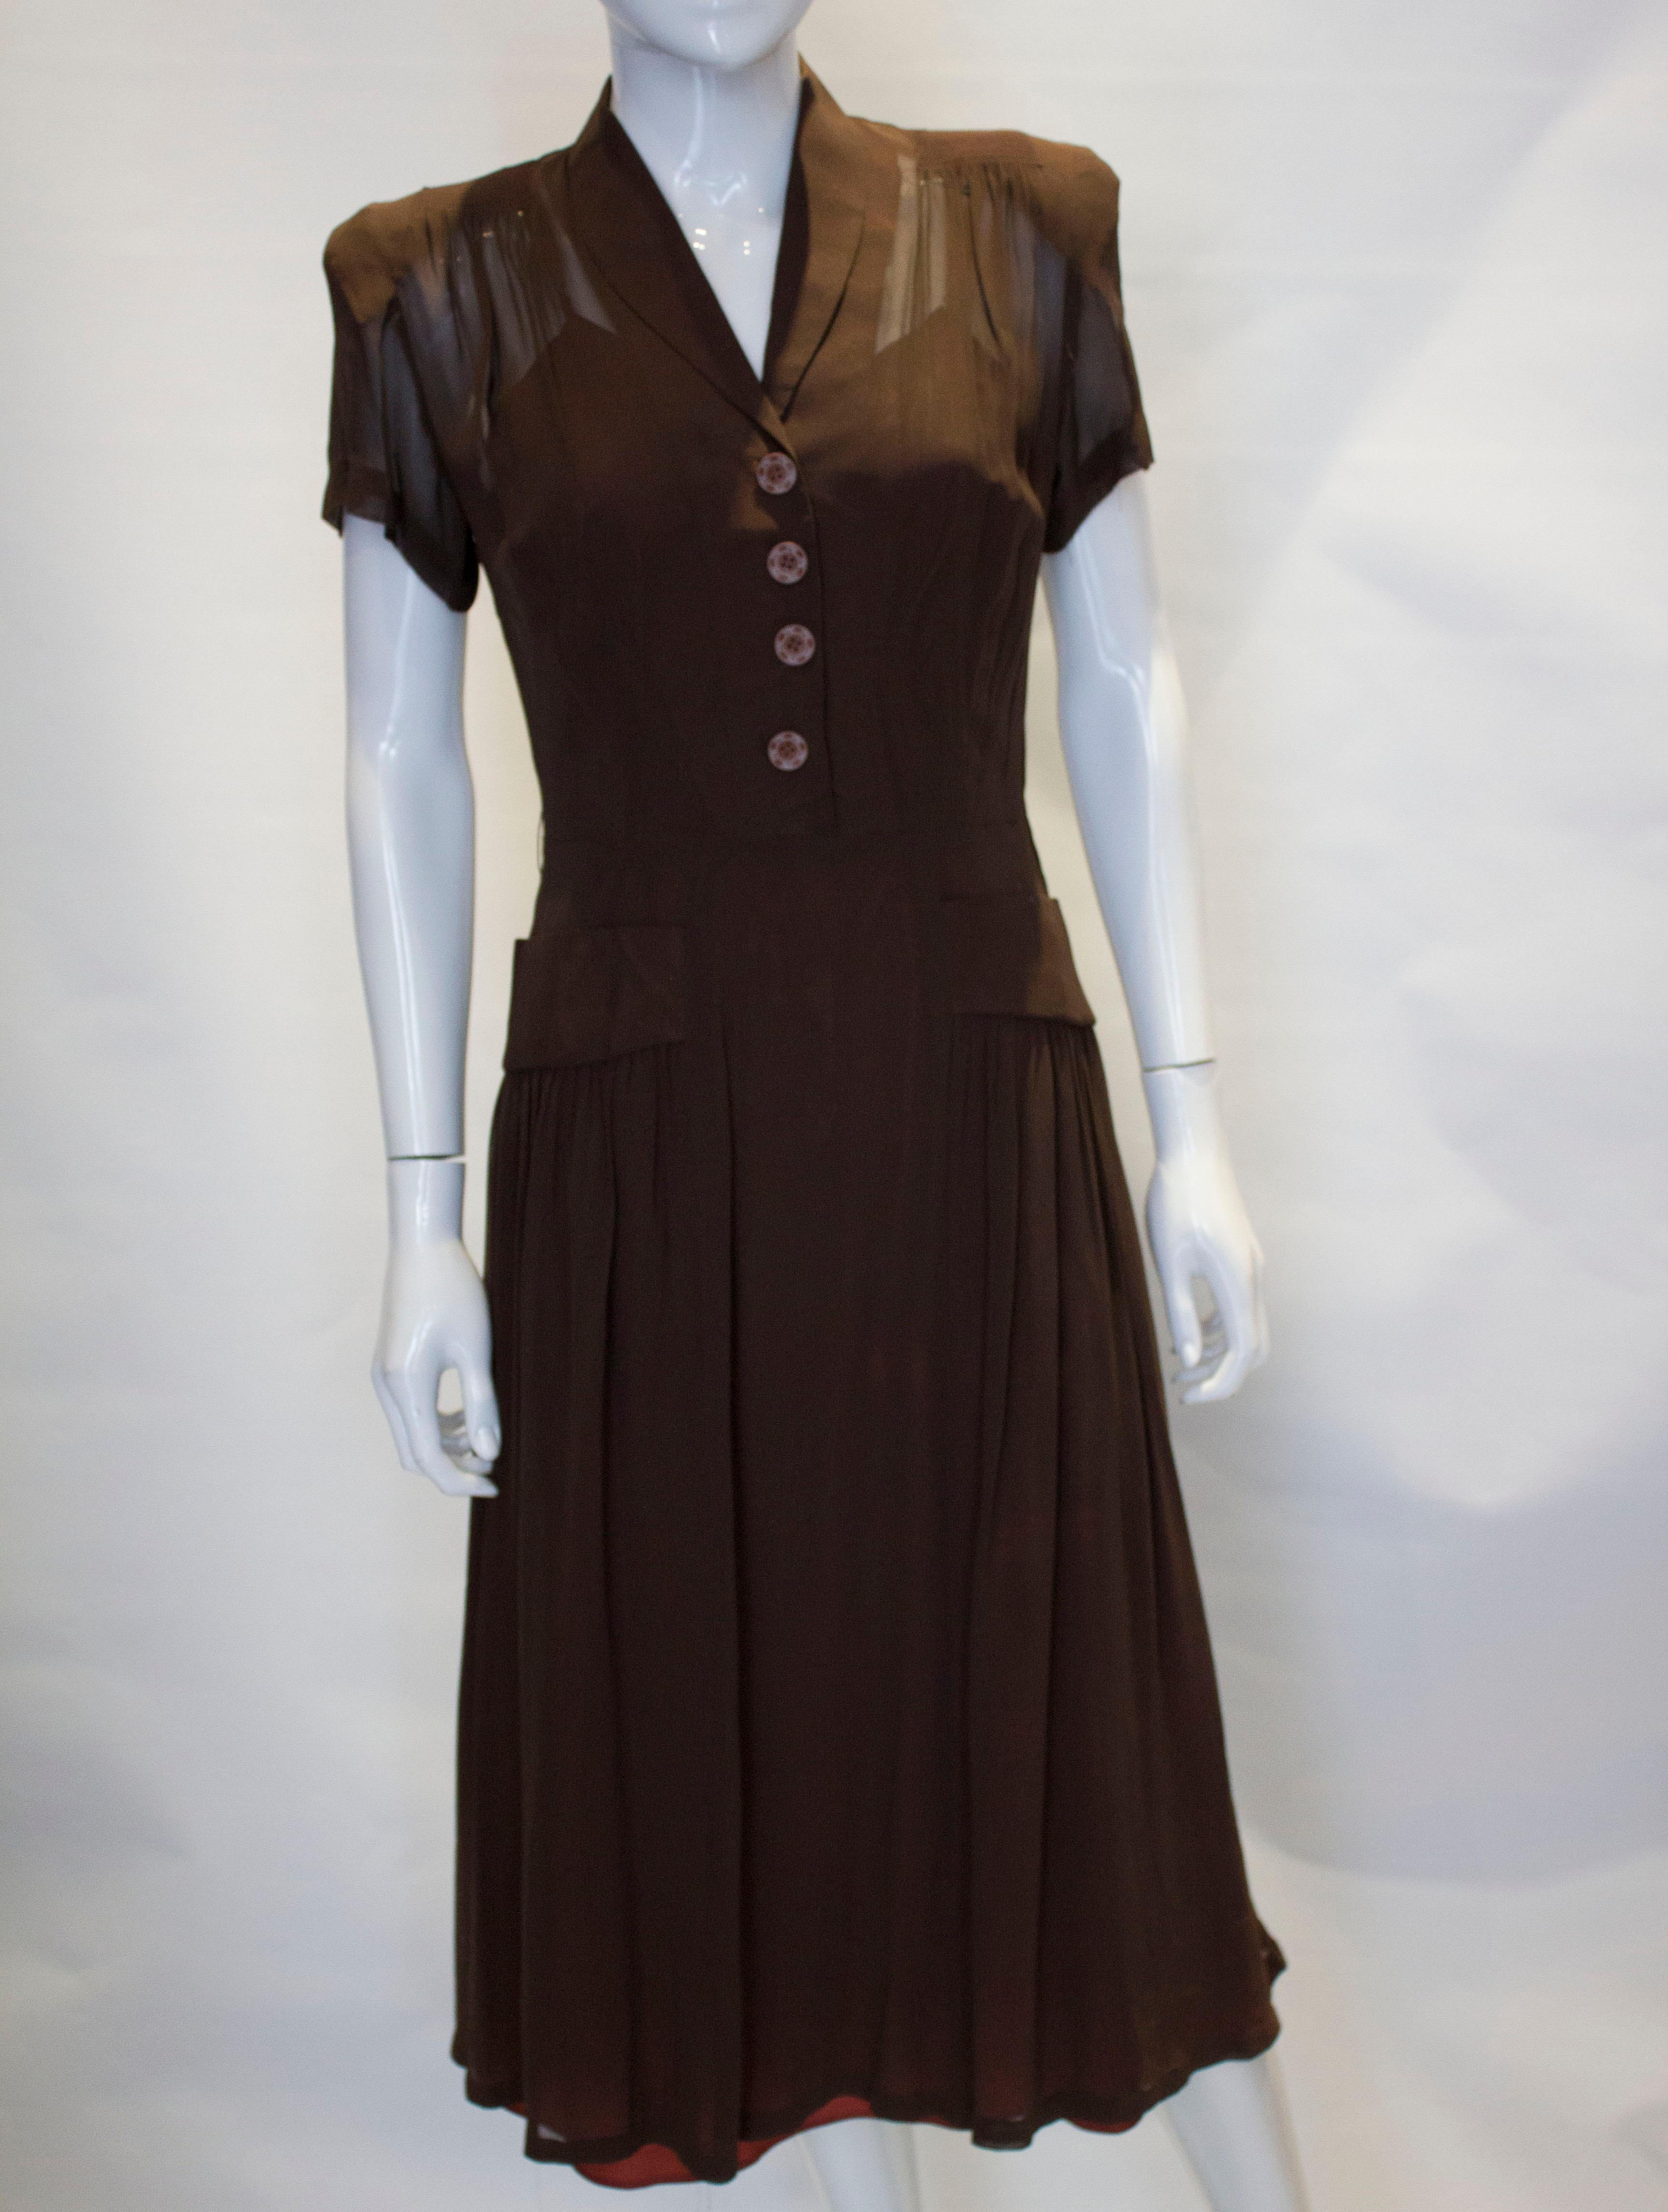 A pretty dress from the 1940s. The dress has a shawl collar, side zip opening, gathering at the shoulders and two pockets at waist level.